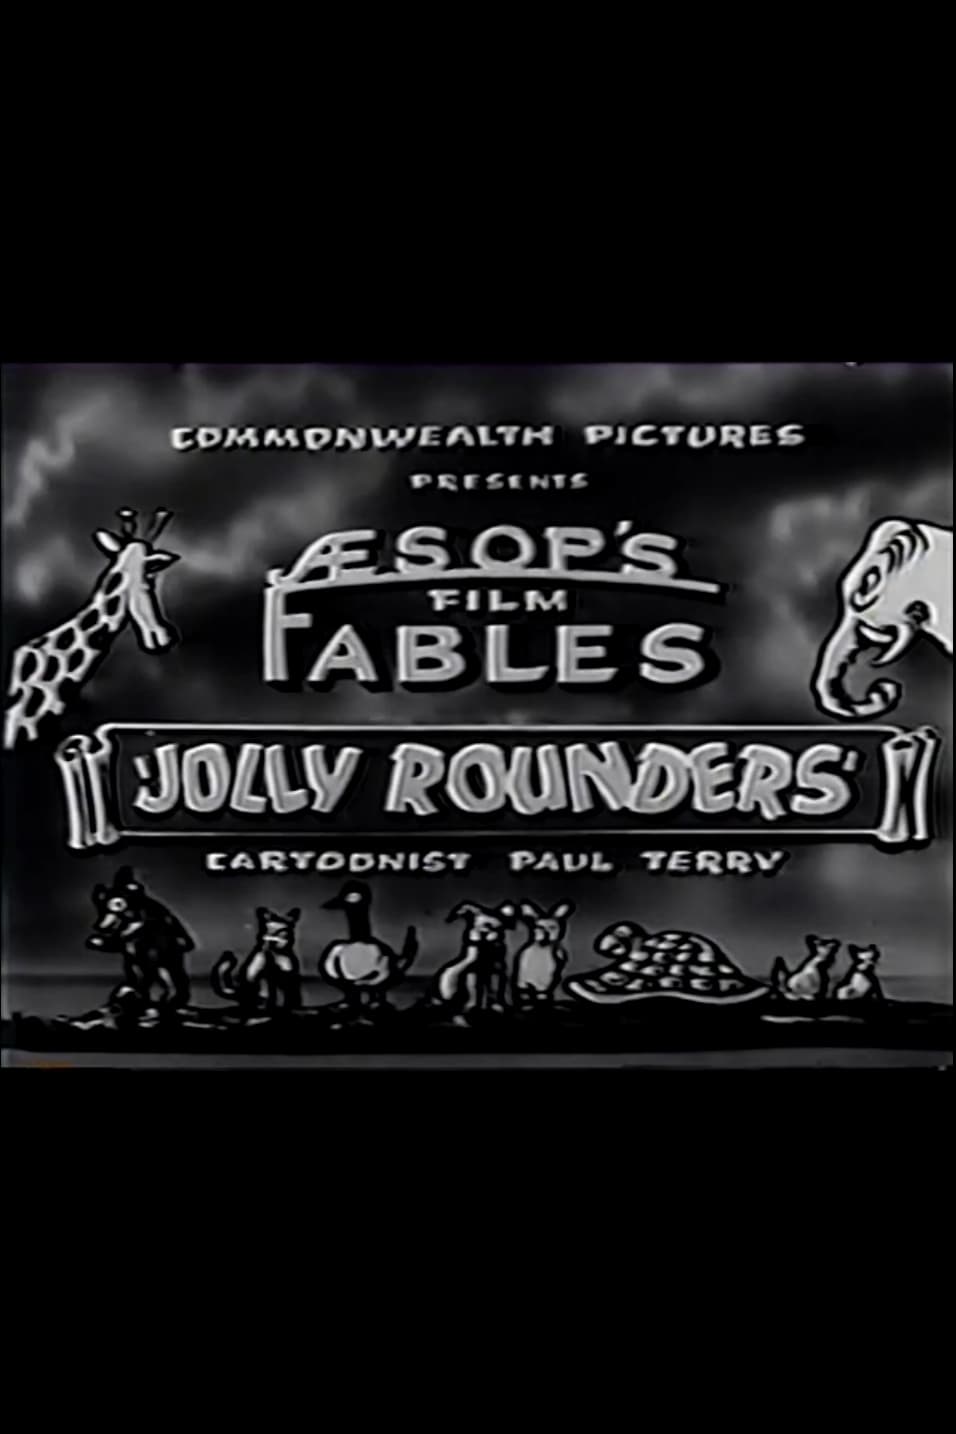 The Fable of the Jolly Rounders